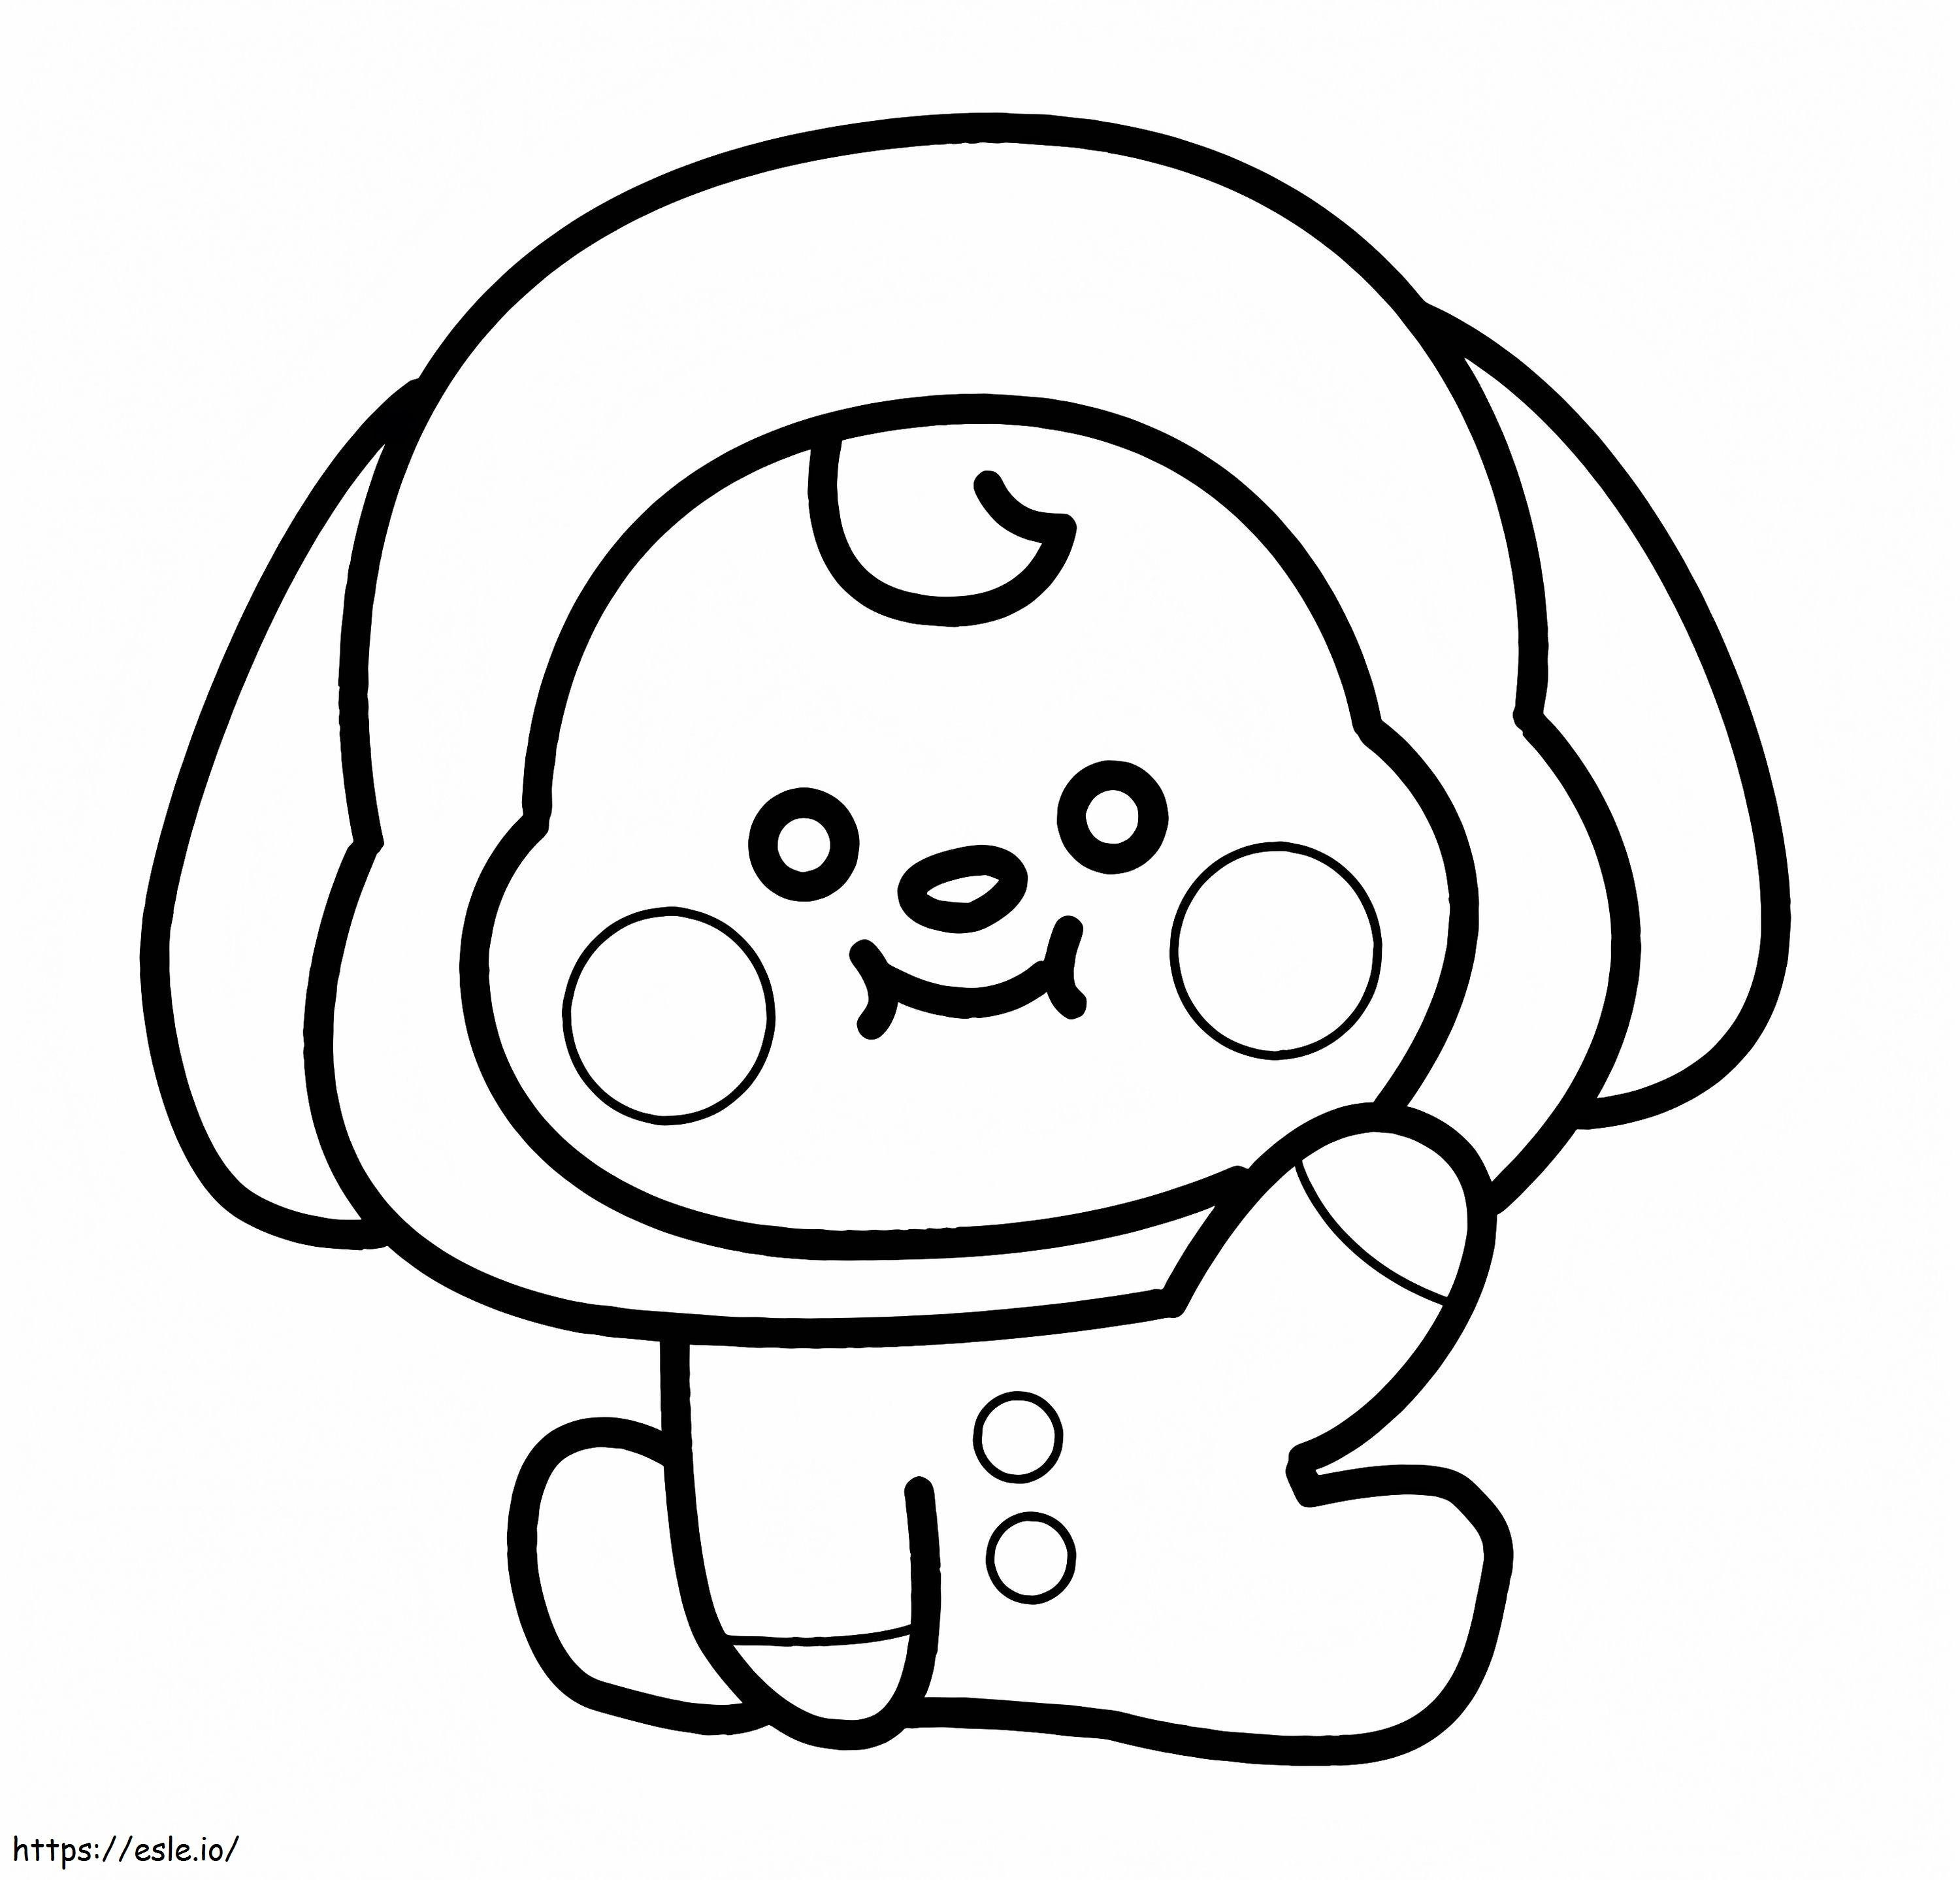 Adorable Chimmy BT21 coloring page